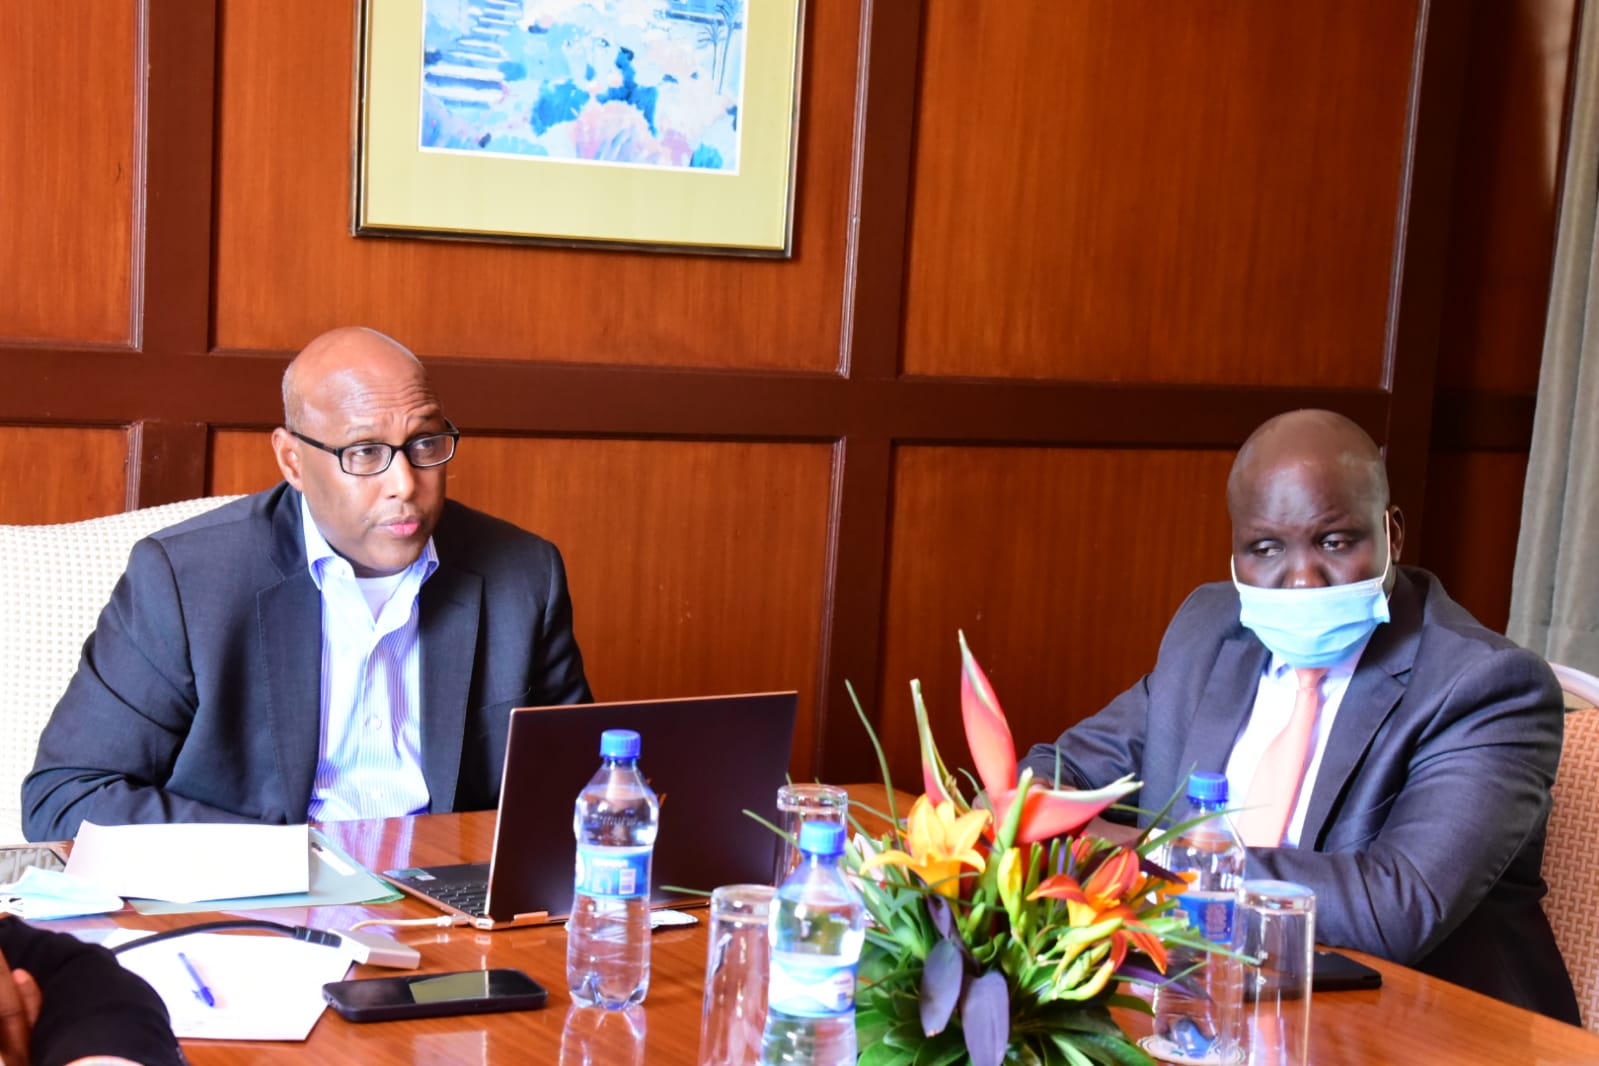 Kenya’s Cabinet Secretary for EAC and Regional Development, Hon. Adan Mohamed (left), and South Sudan’s Undersecretary in the Ministry of EAC Affairs, Hon. Andrea Arikk Malueth, during the 3rd Joint Virtual Multi-sectoral Meeting of Ministers responsible for EAC Affairs, Health and Transport.